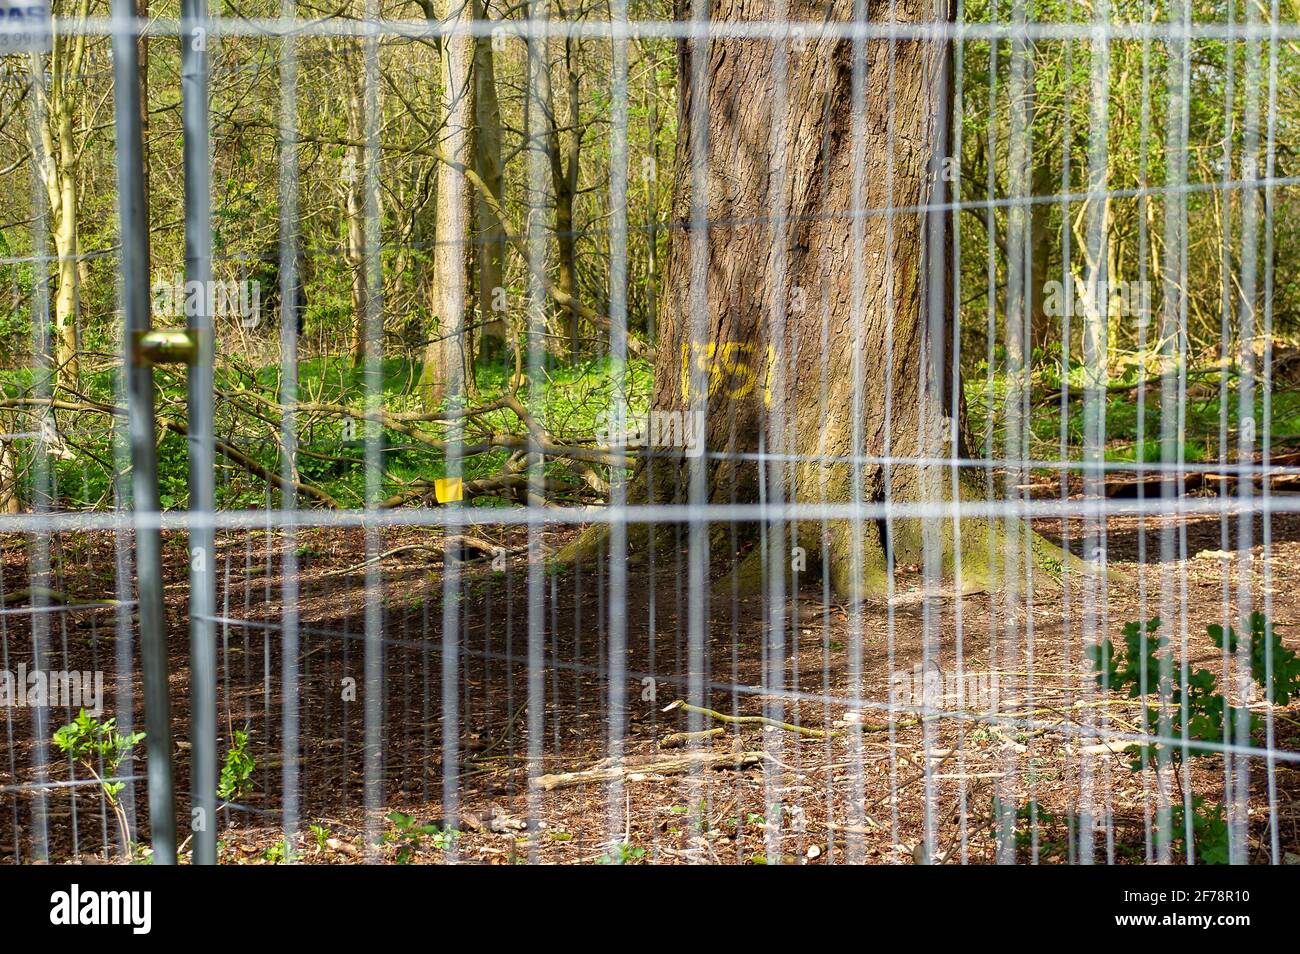 Aylesbury, UK. 5th April, 2021. Another area of woodland is fenced off ready for HS2 to destroy more trees. The very controversial and over budget High Speed 2 rail link from London to Birmingham is carving a huge scar across the Chilterns which is an AONB and puts 108 ancient woodlands, 693 wildlife sites and 33 SSSIs at risk. Credit: Maureen McLean/Alamy Stock Photo